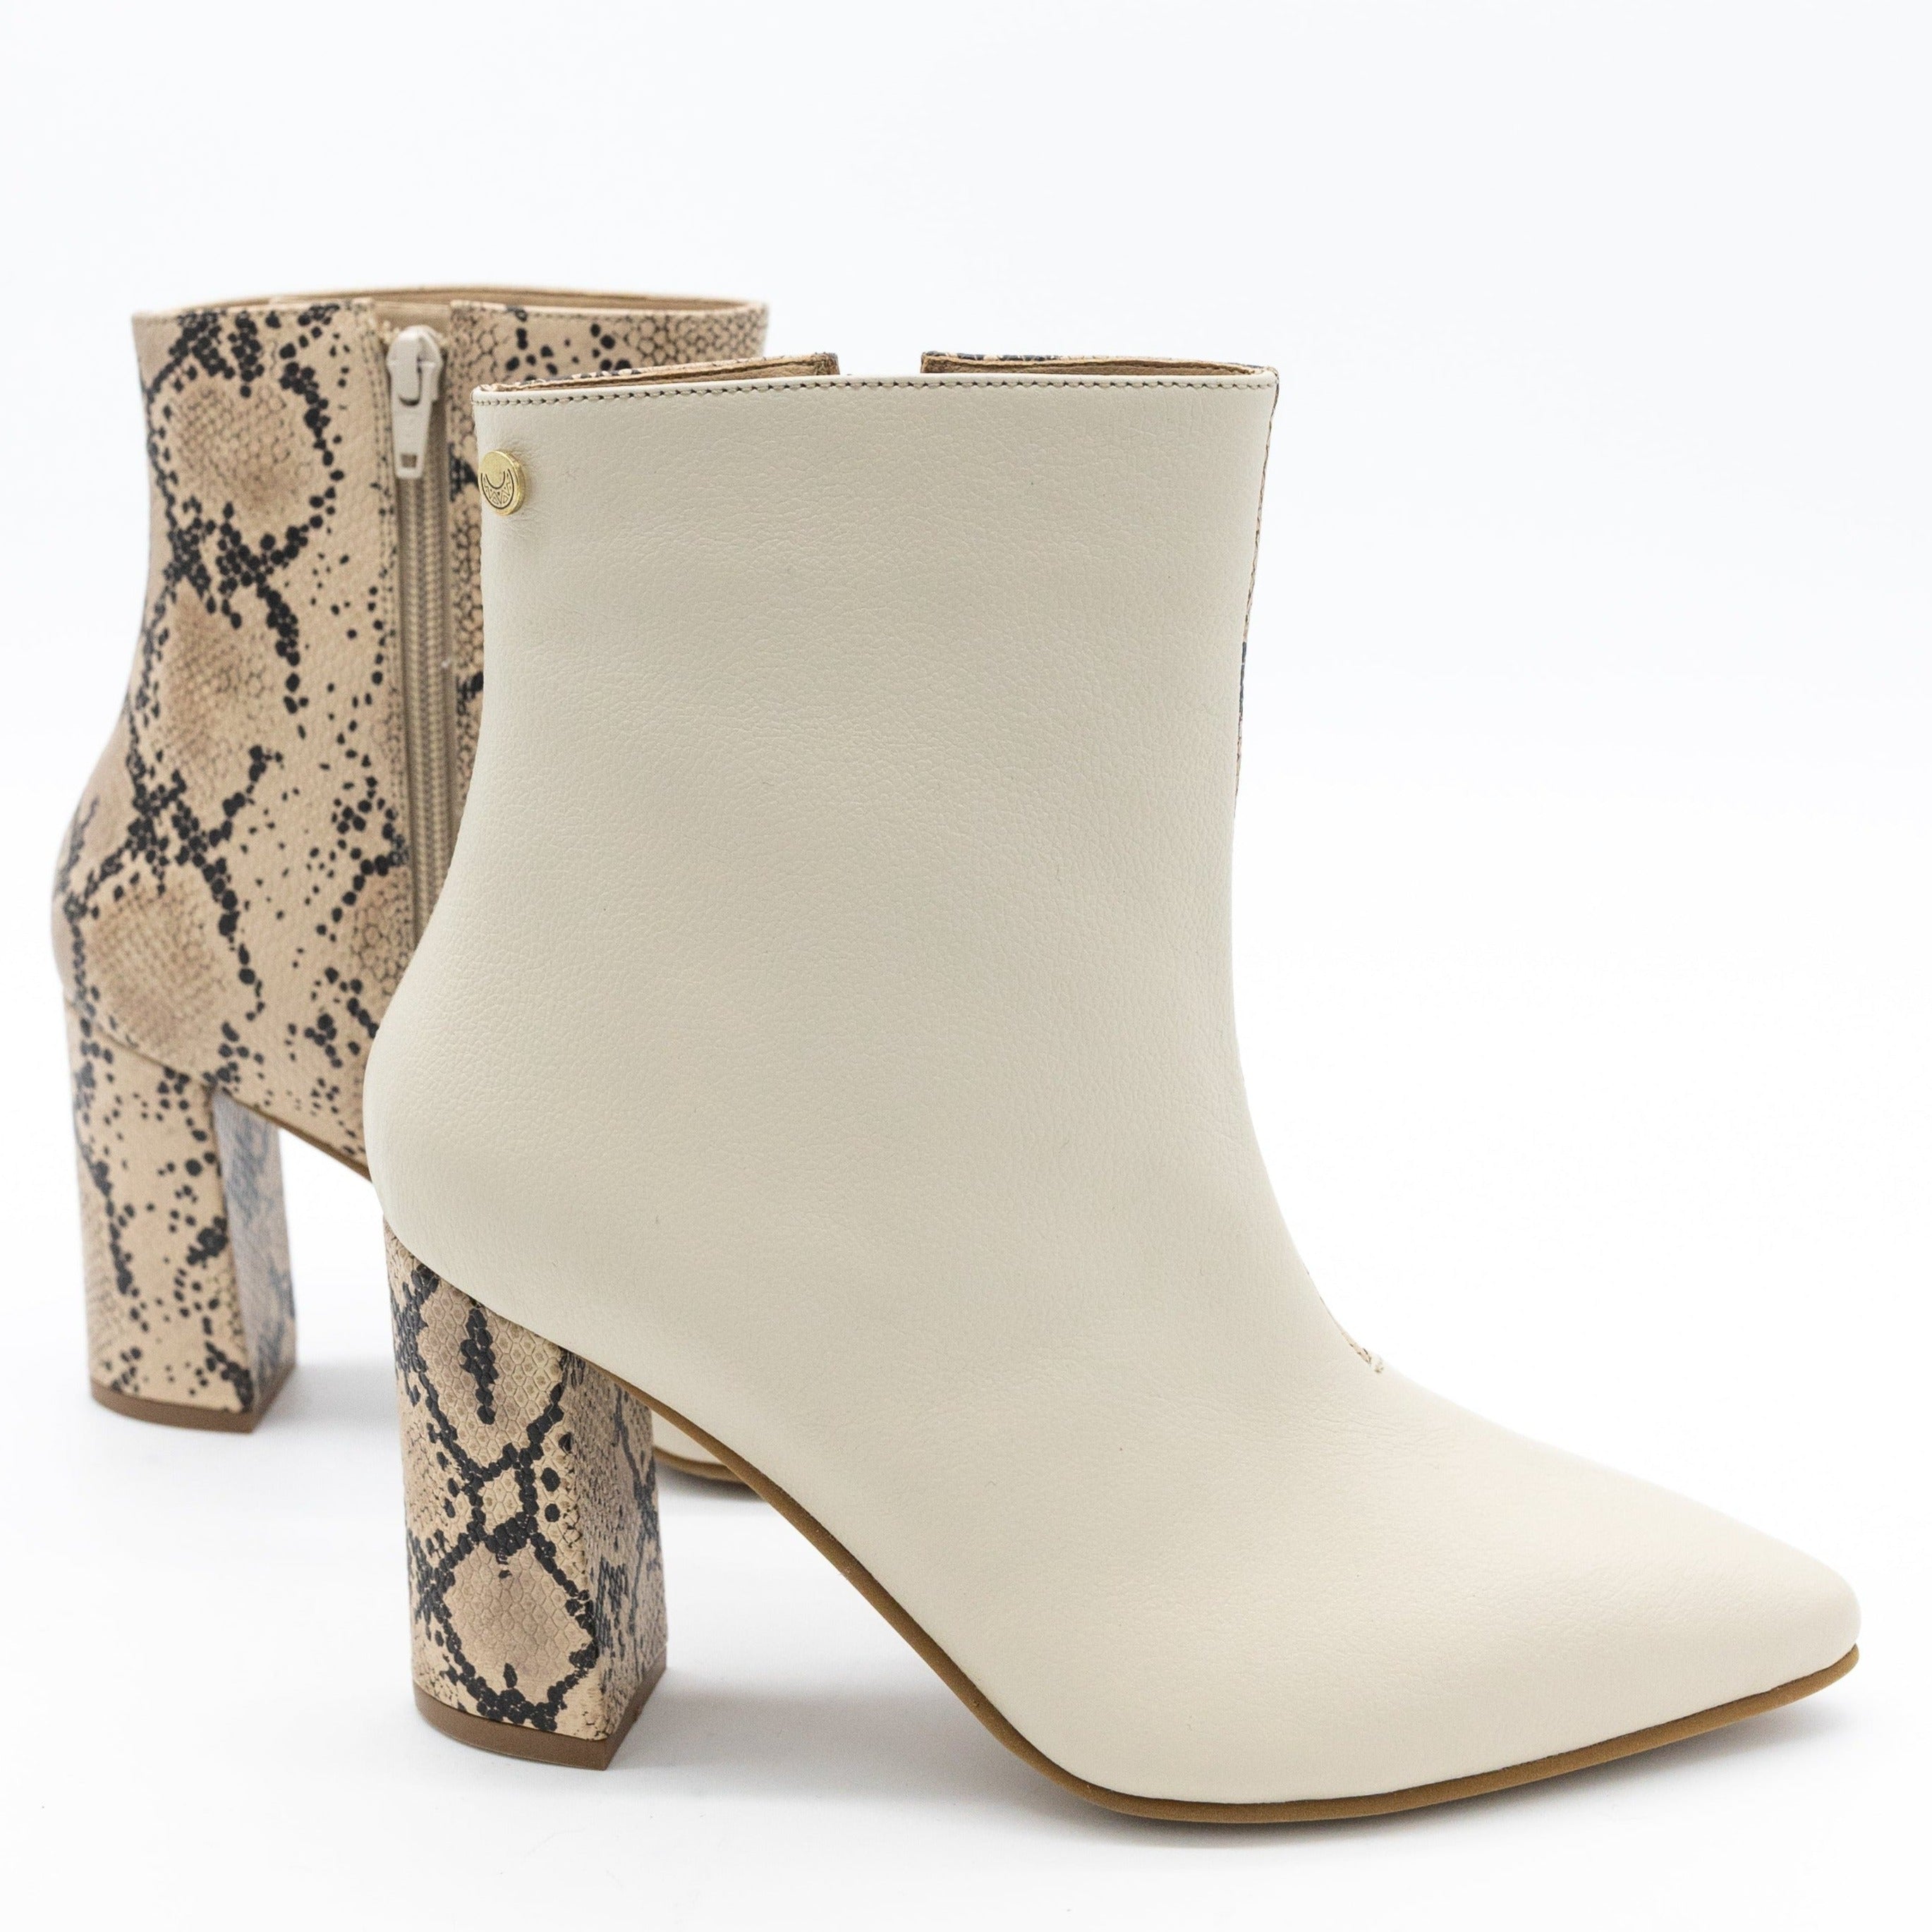 Handcrafted Leather Heeled Boot, Ivory White Smooth Leather and Embossed Sand Snakeskin Leather. Stivali New York